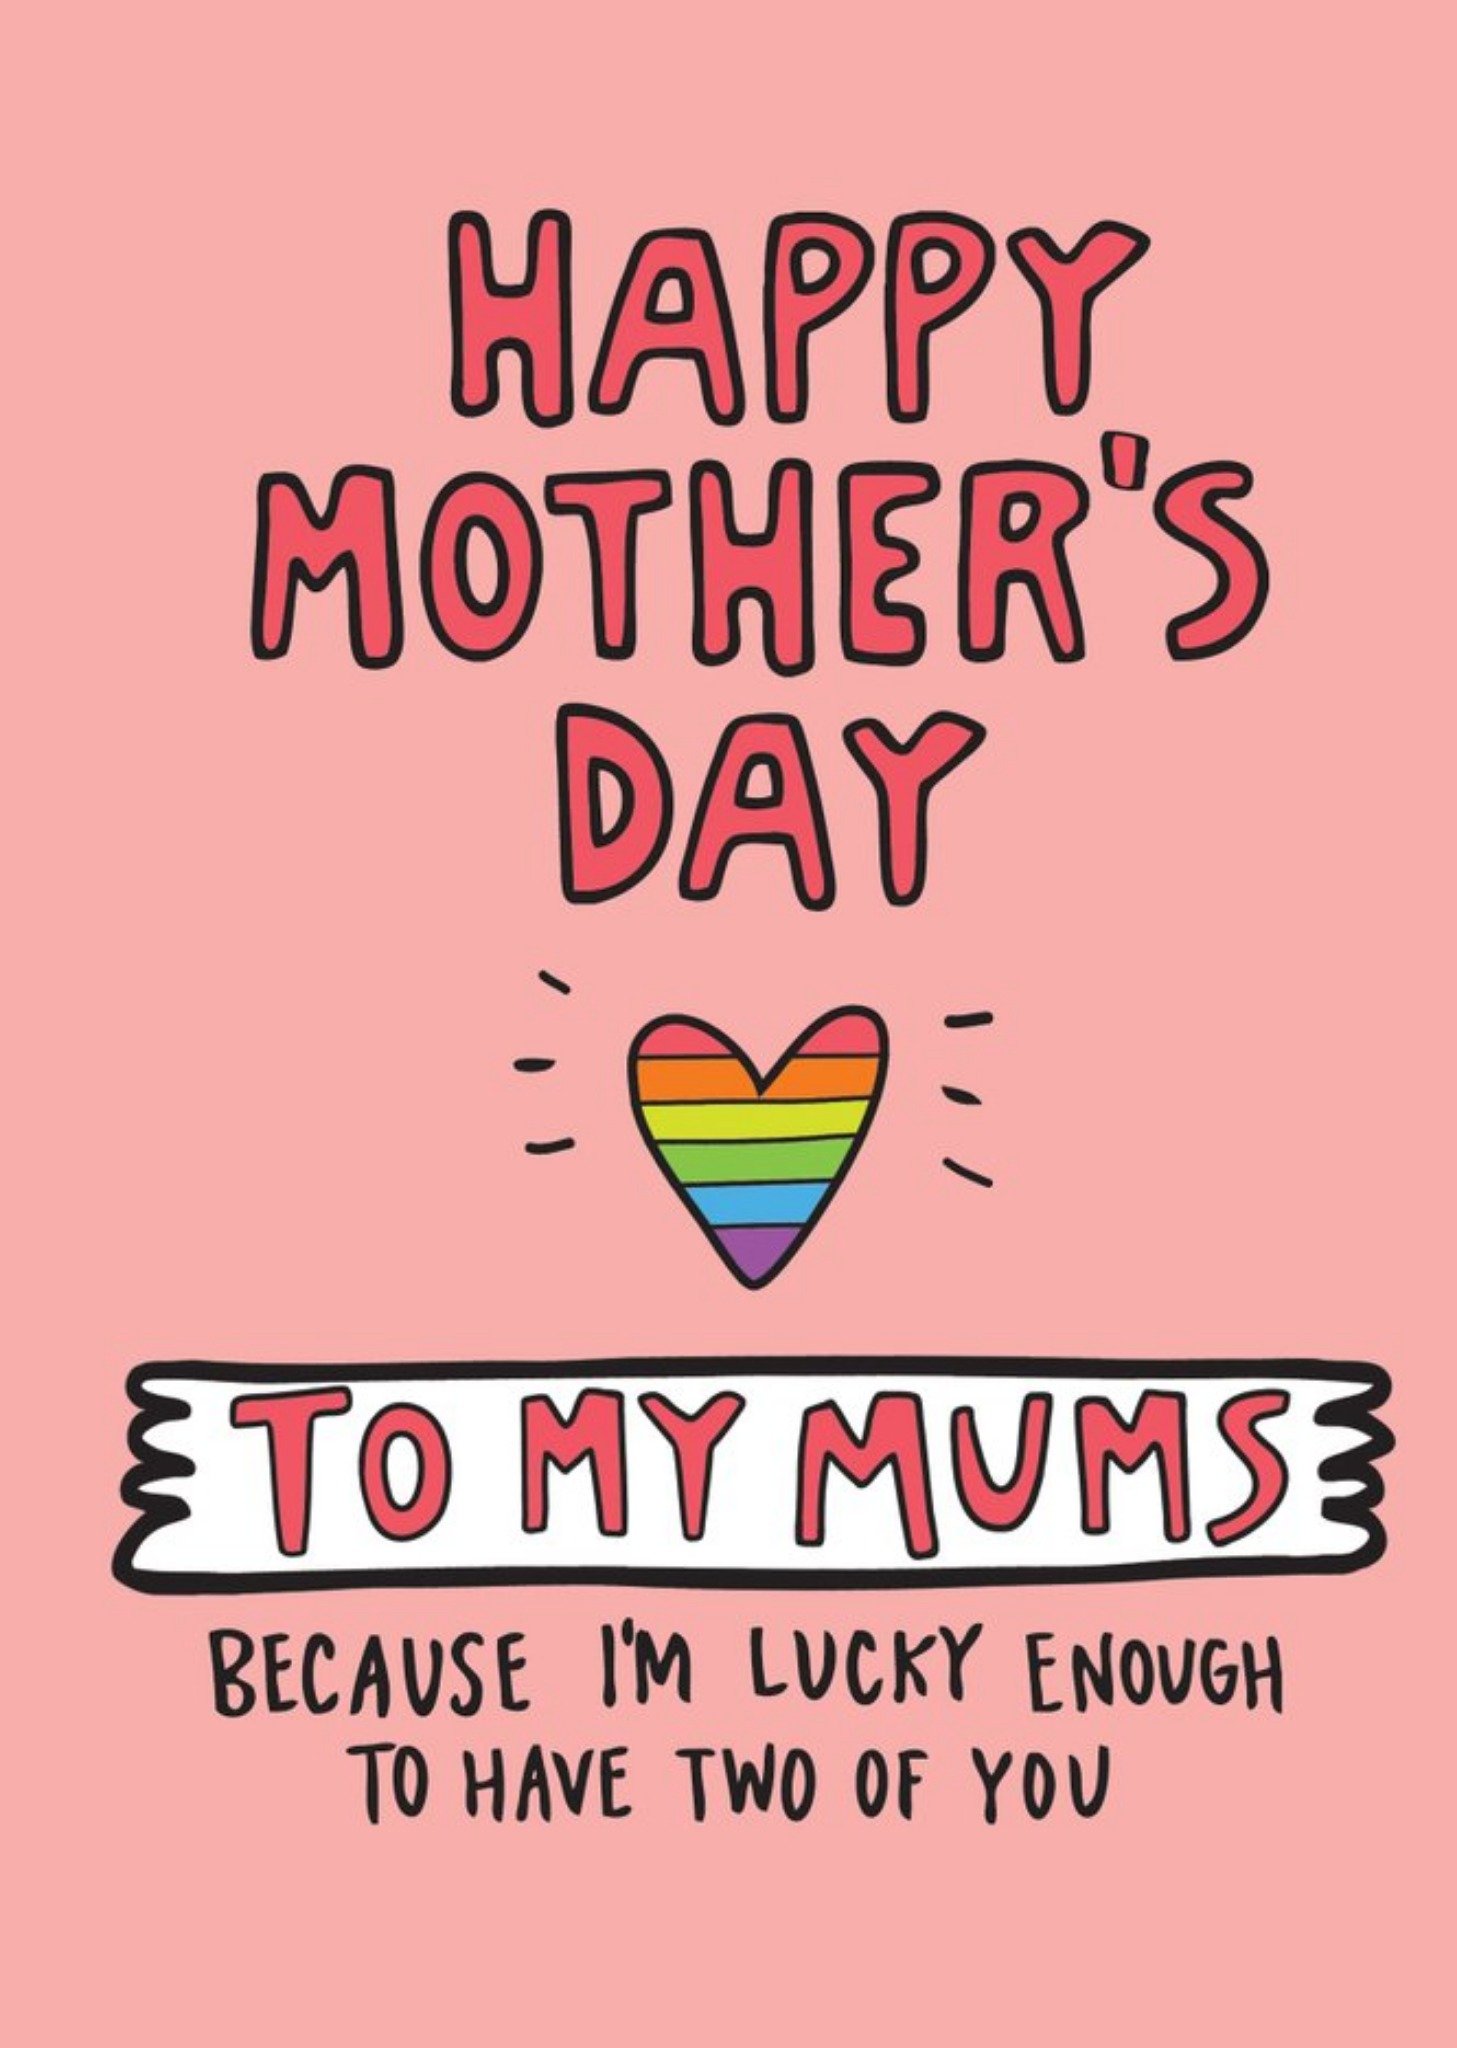 Moonpig Angela Chick I'm Lucky Enough To Have Two Mums Mother's Day Card Ecard